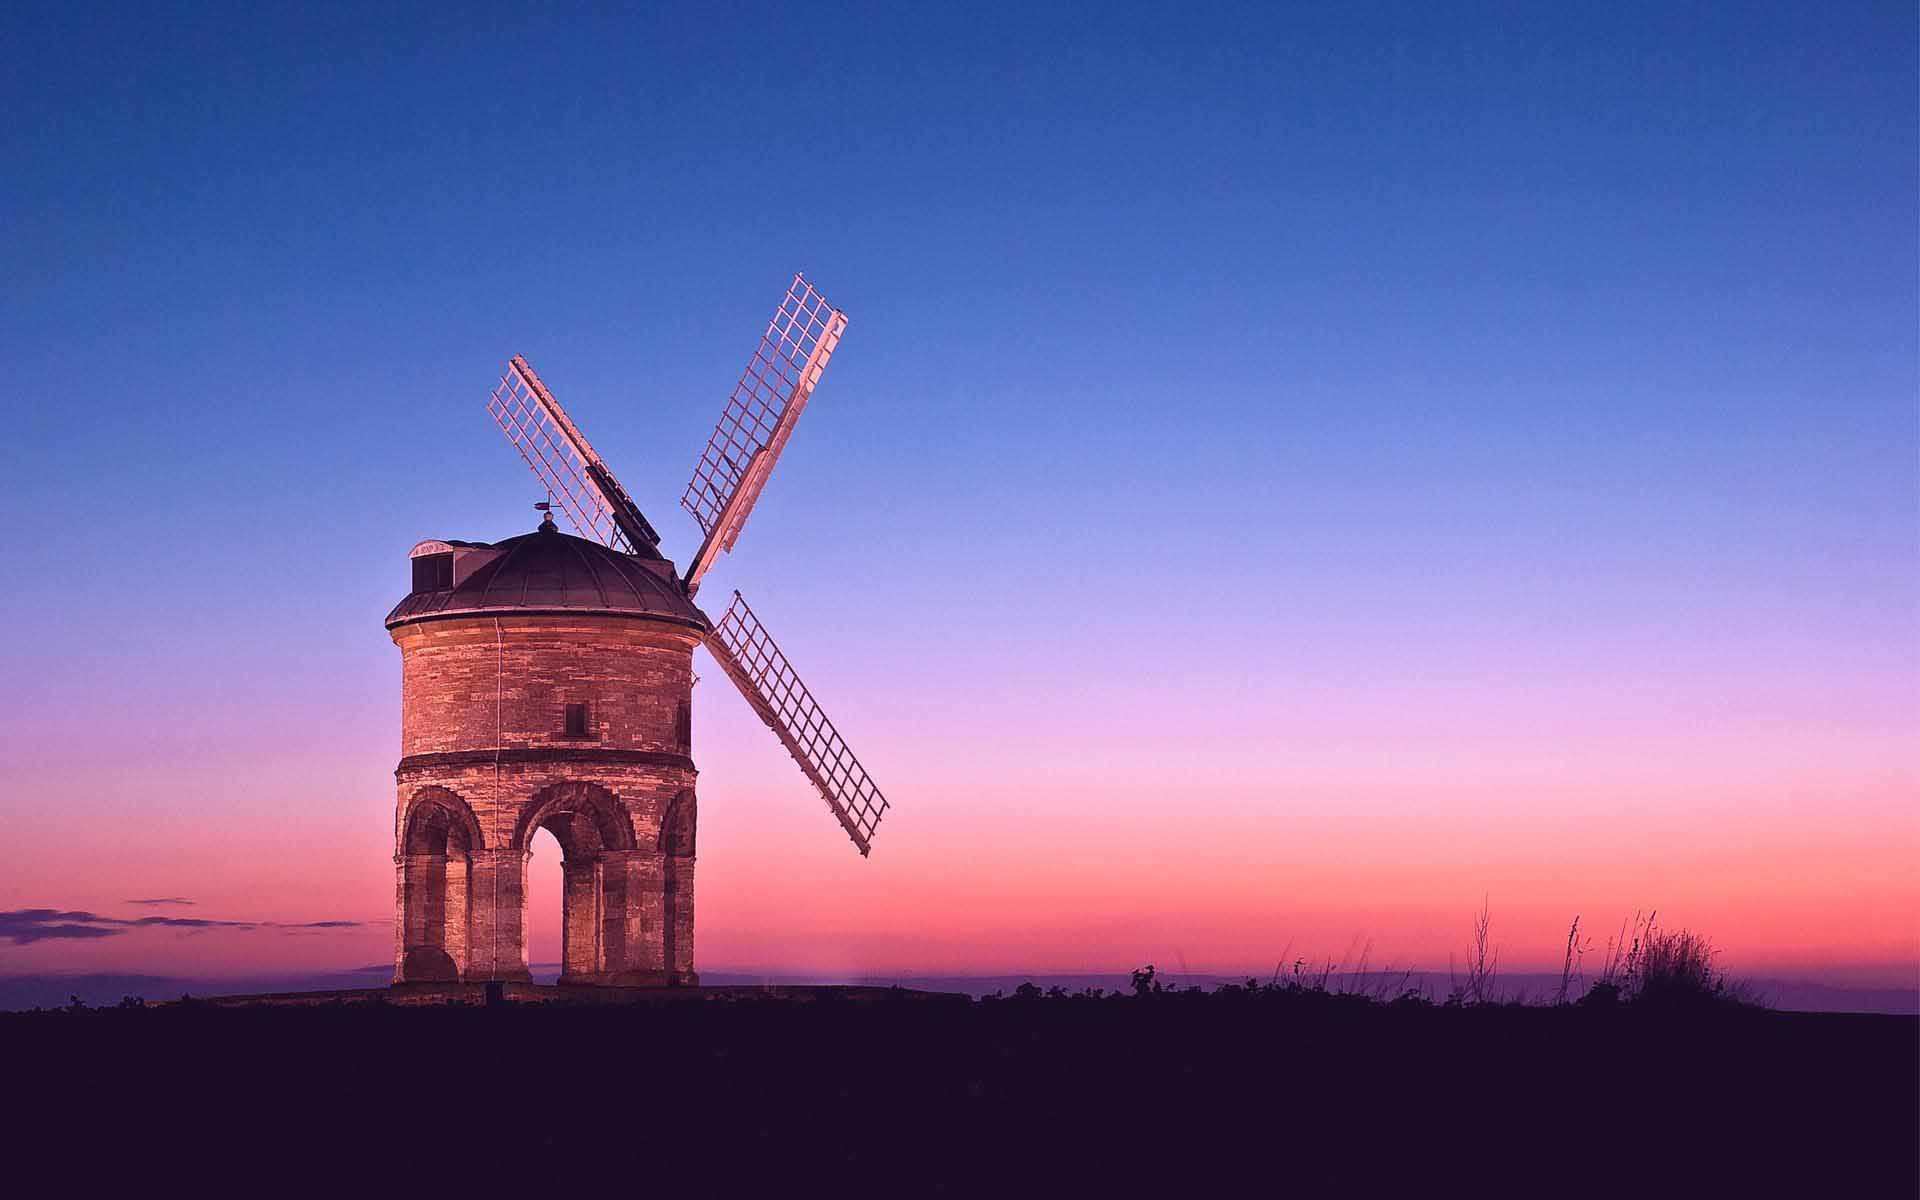 1920x1200 windmill wallpaper backgrounds | Windmill Photos HD Wallpapers | WINDMILLS  AND WIND TURBINES (2) | Pinterest | Windmill and Lighthouse